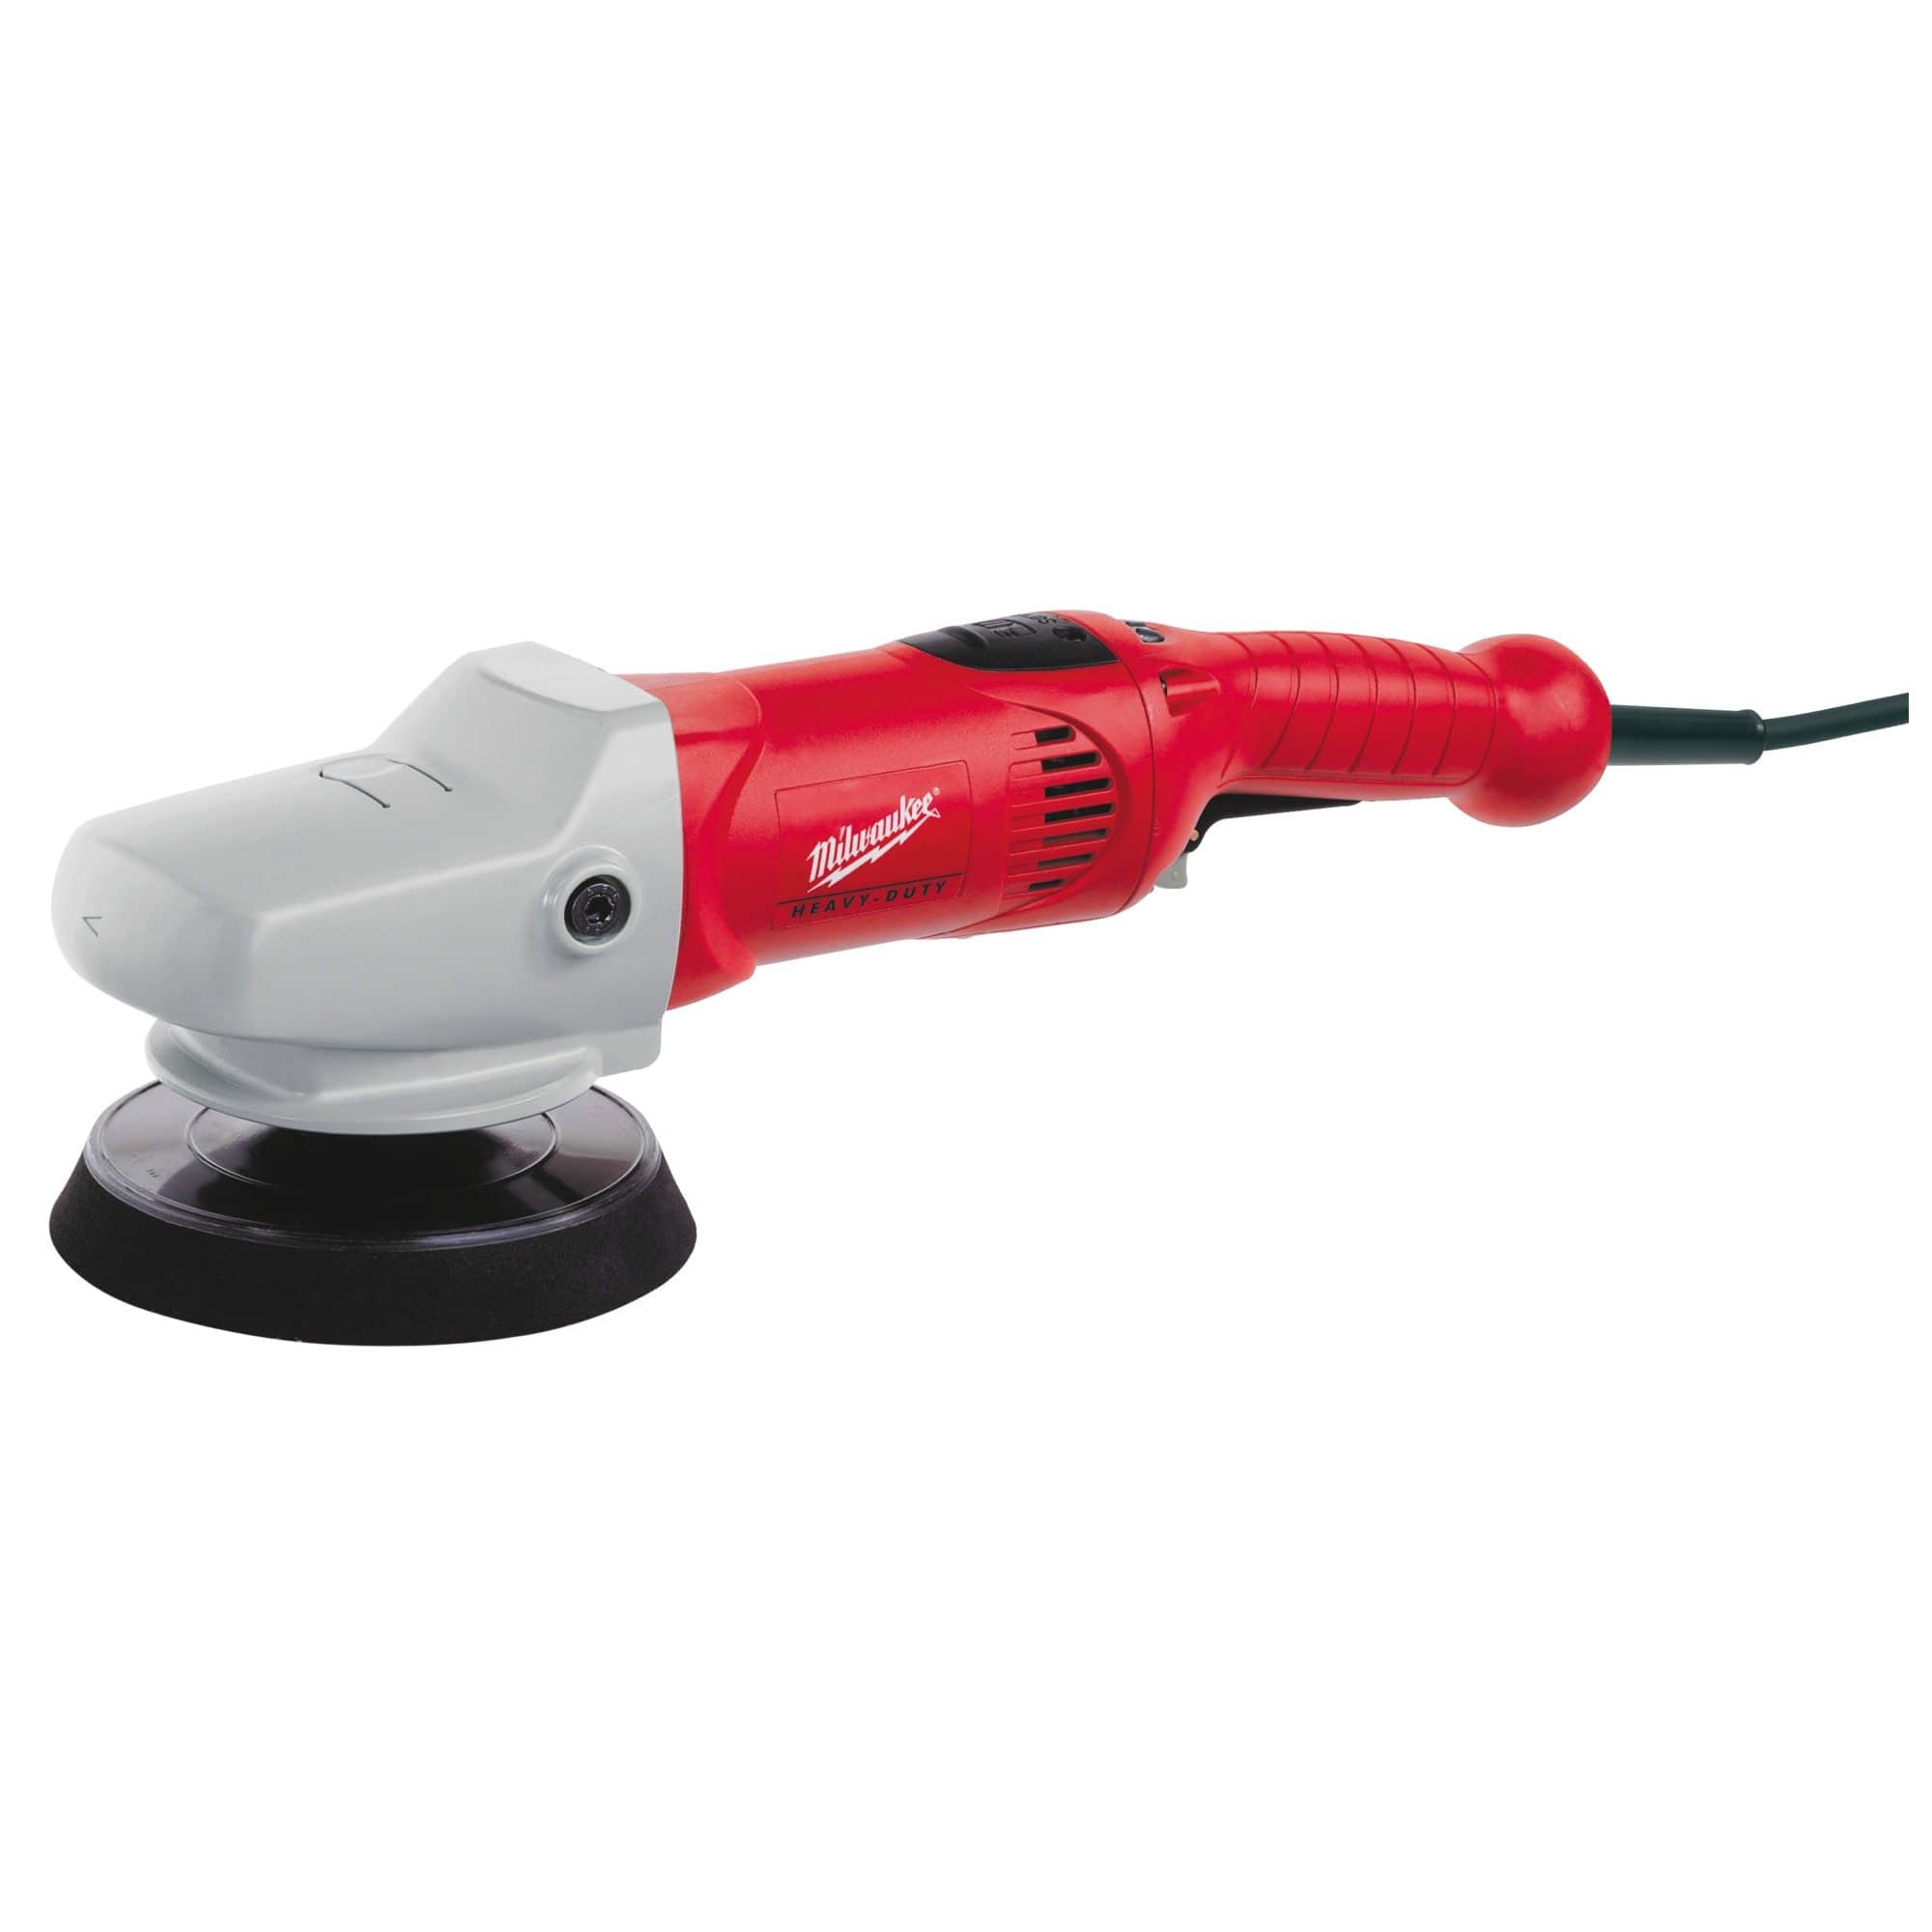 Milwaukee Sander 1200W with Electronic Variable Speed - AS 12 E | Supply Master | Accra, Ghana Tools Building Steel Engineering Hardware tool